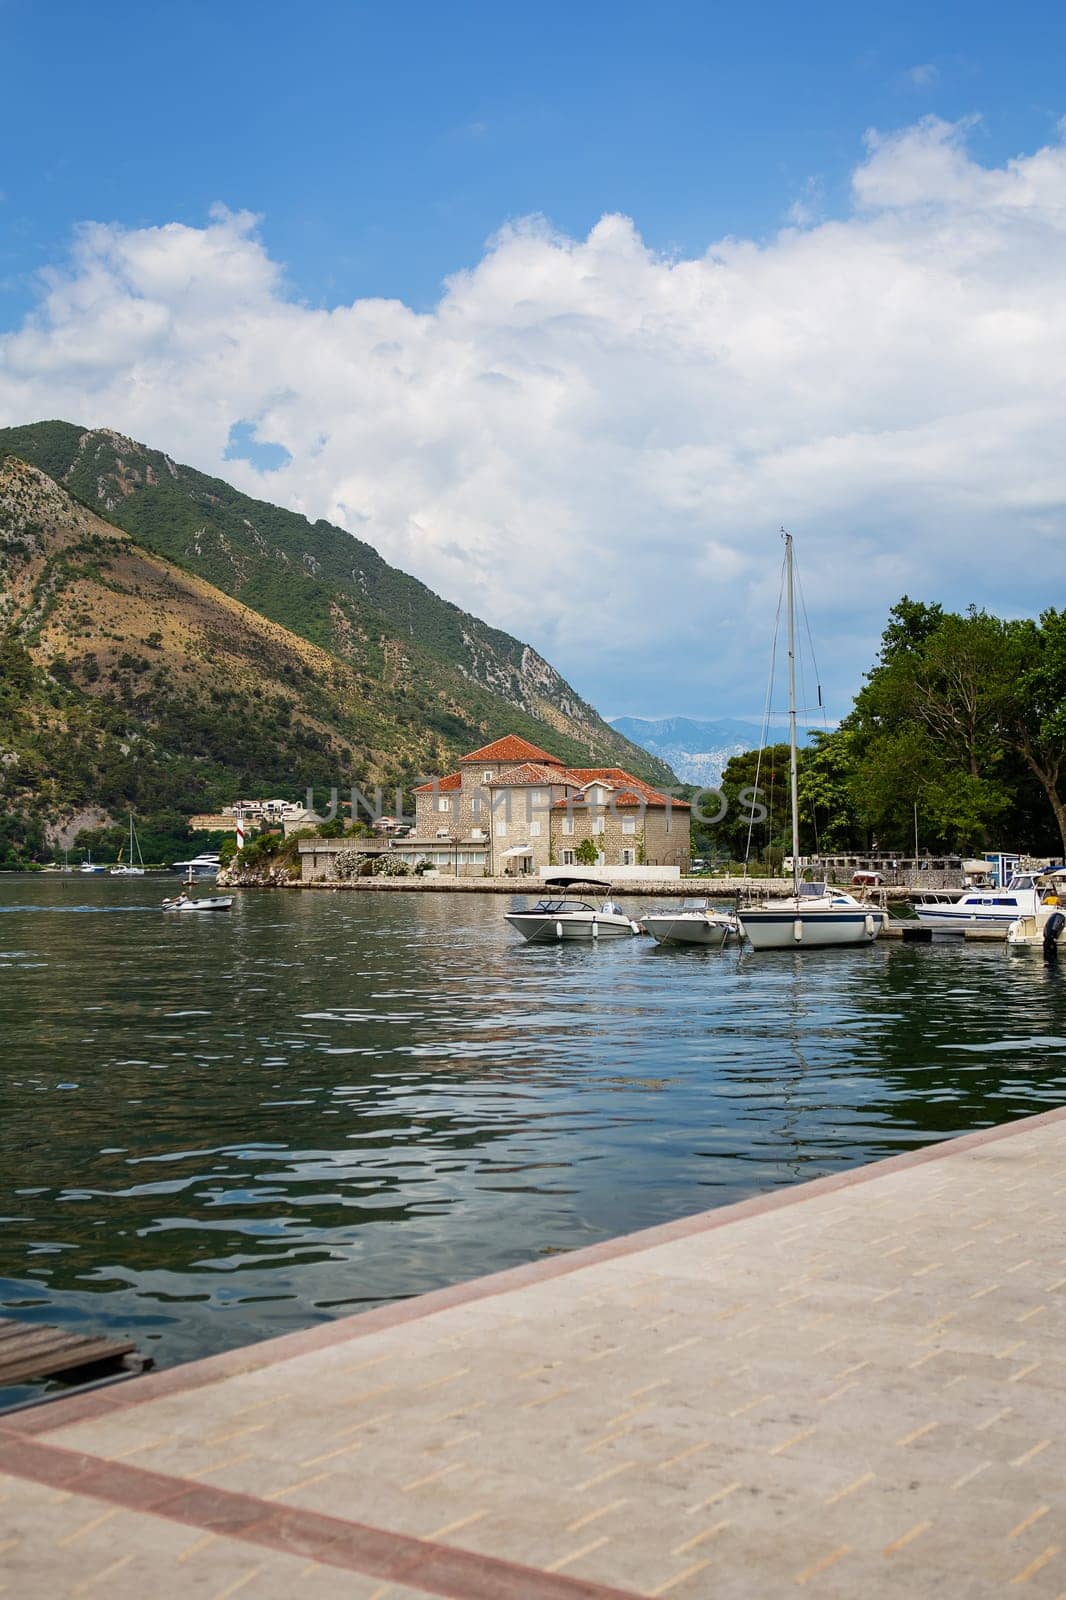 Very beautiful embankment of the Bay of Kotor, Montenegro. A beautiful and cozy city, tiled houses. The concept of rest and vacation in Europe